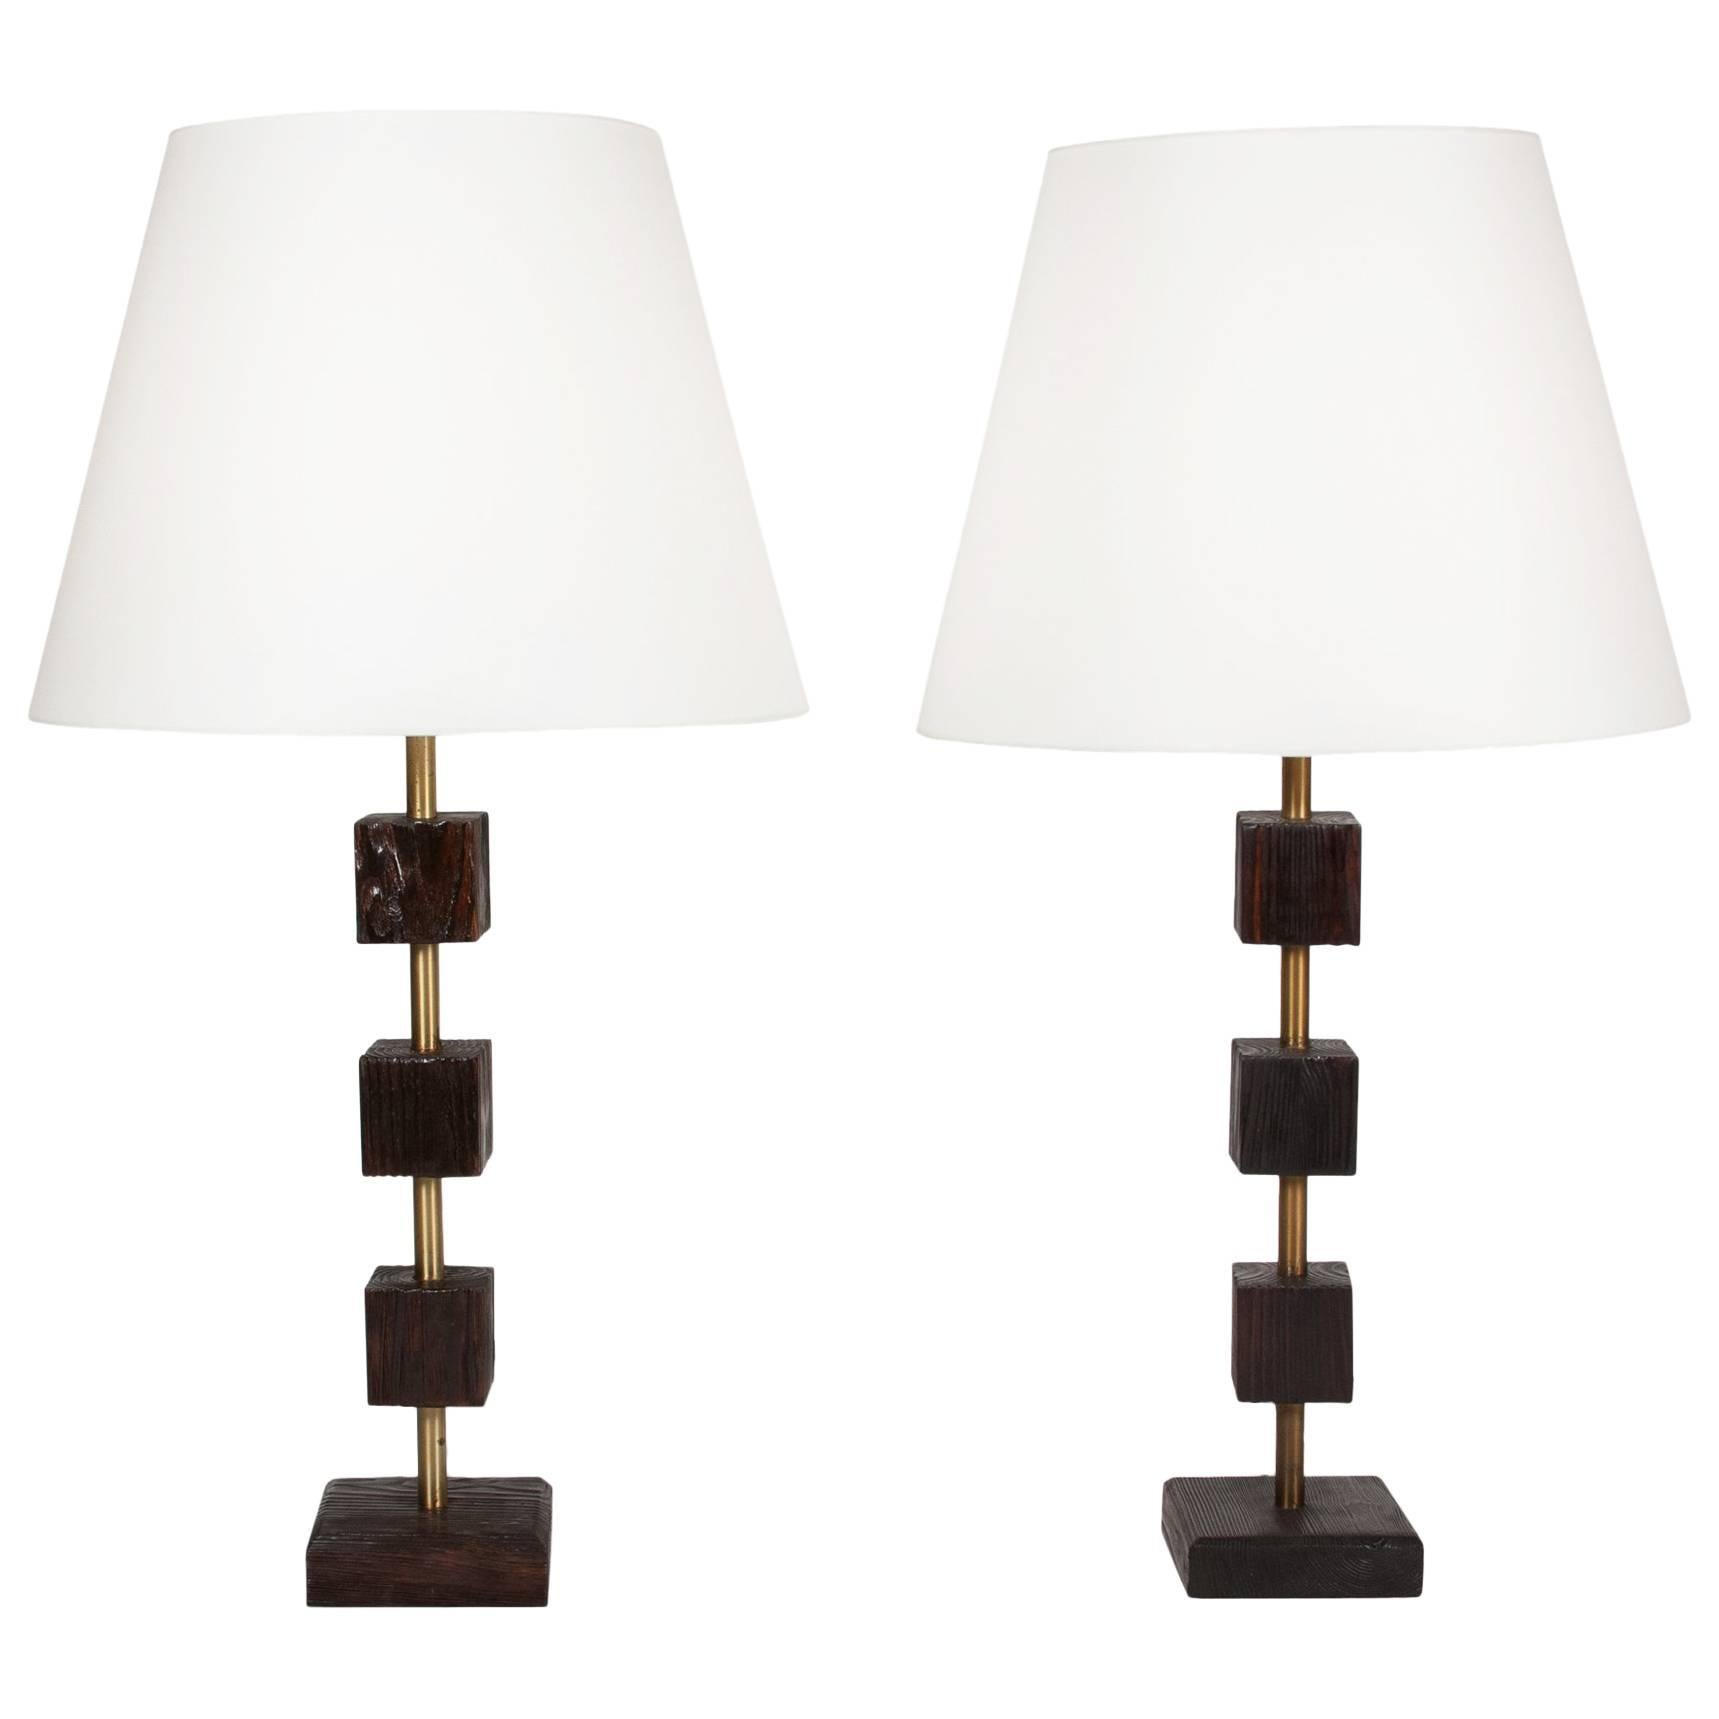 Pair of Ebonized Pine Table Lamps, American, 1950s For Sale